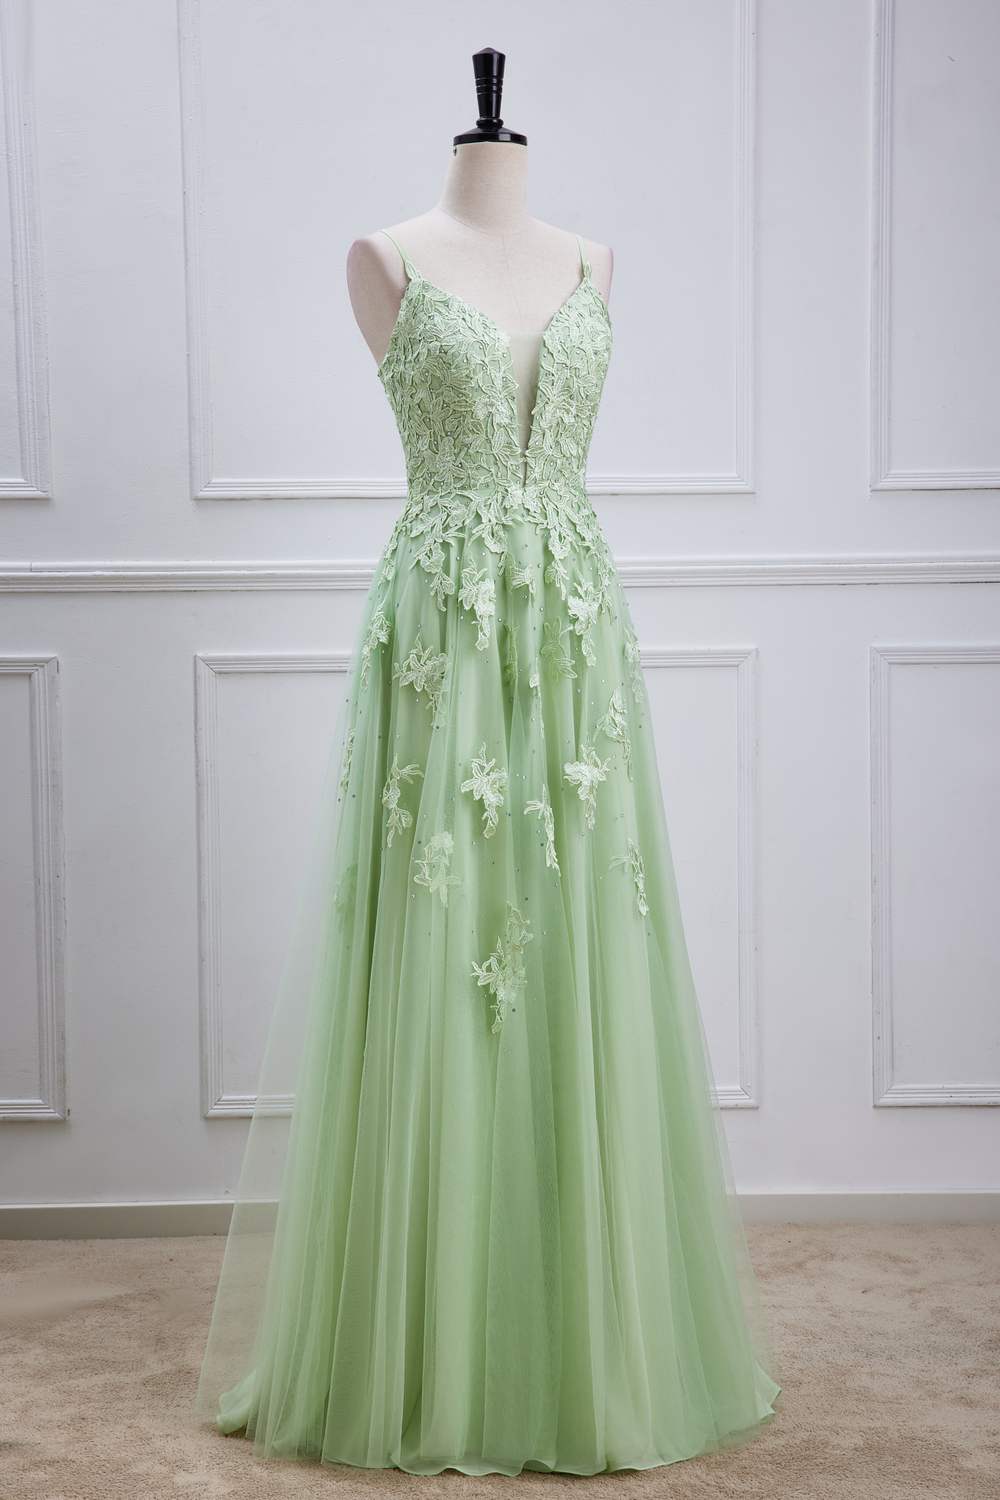 Sage Green Plunging V Neck Lace-Up Appliques Long Prom Dress